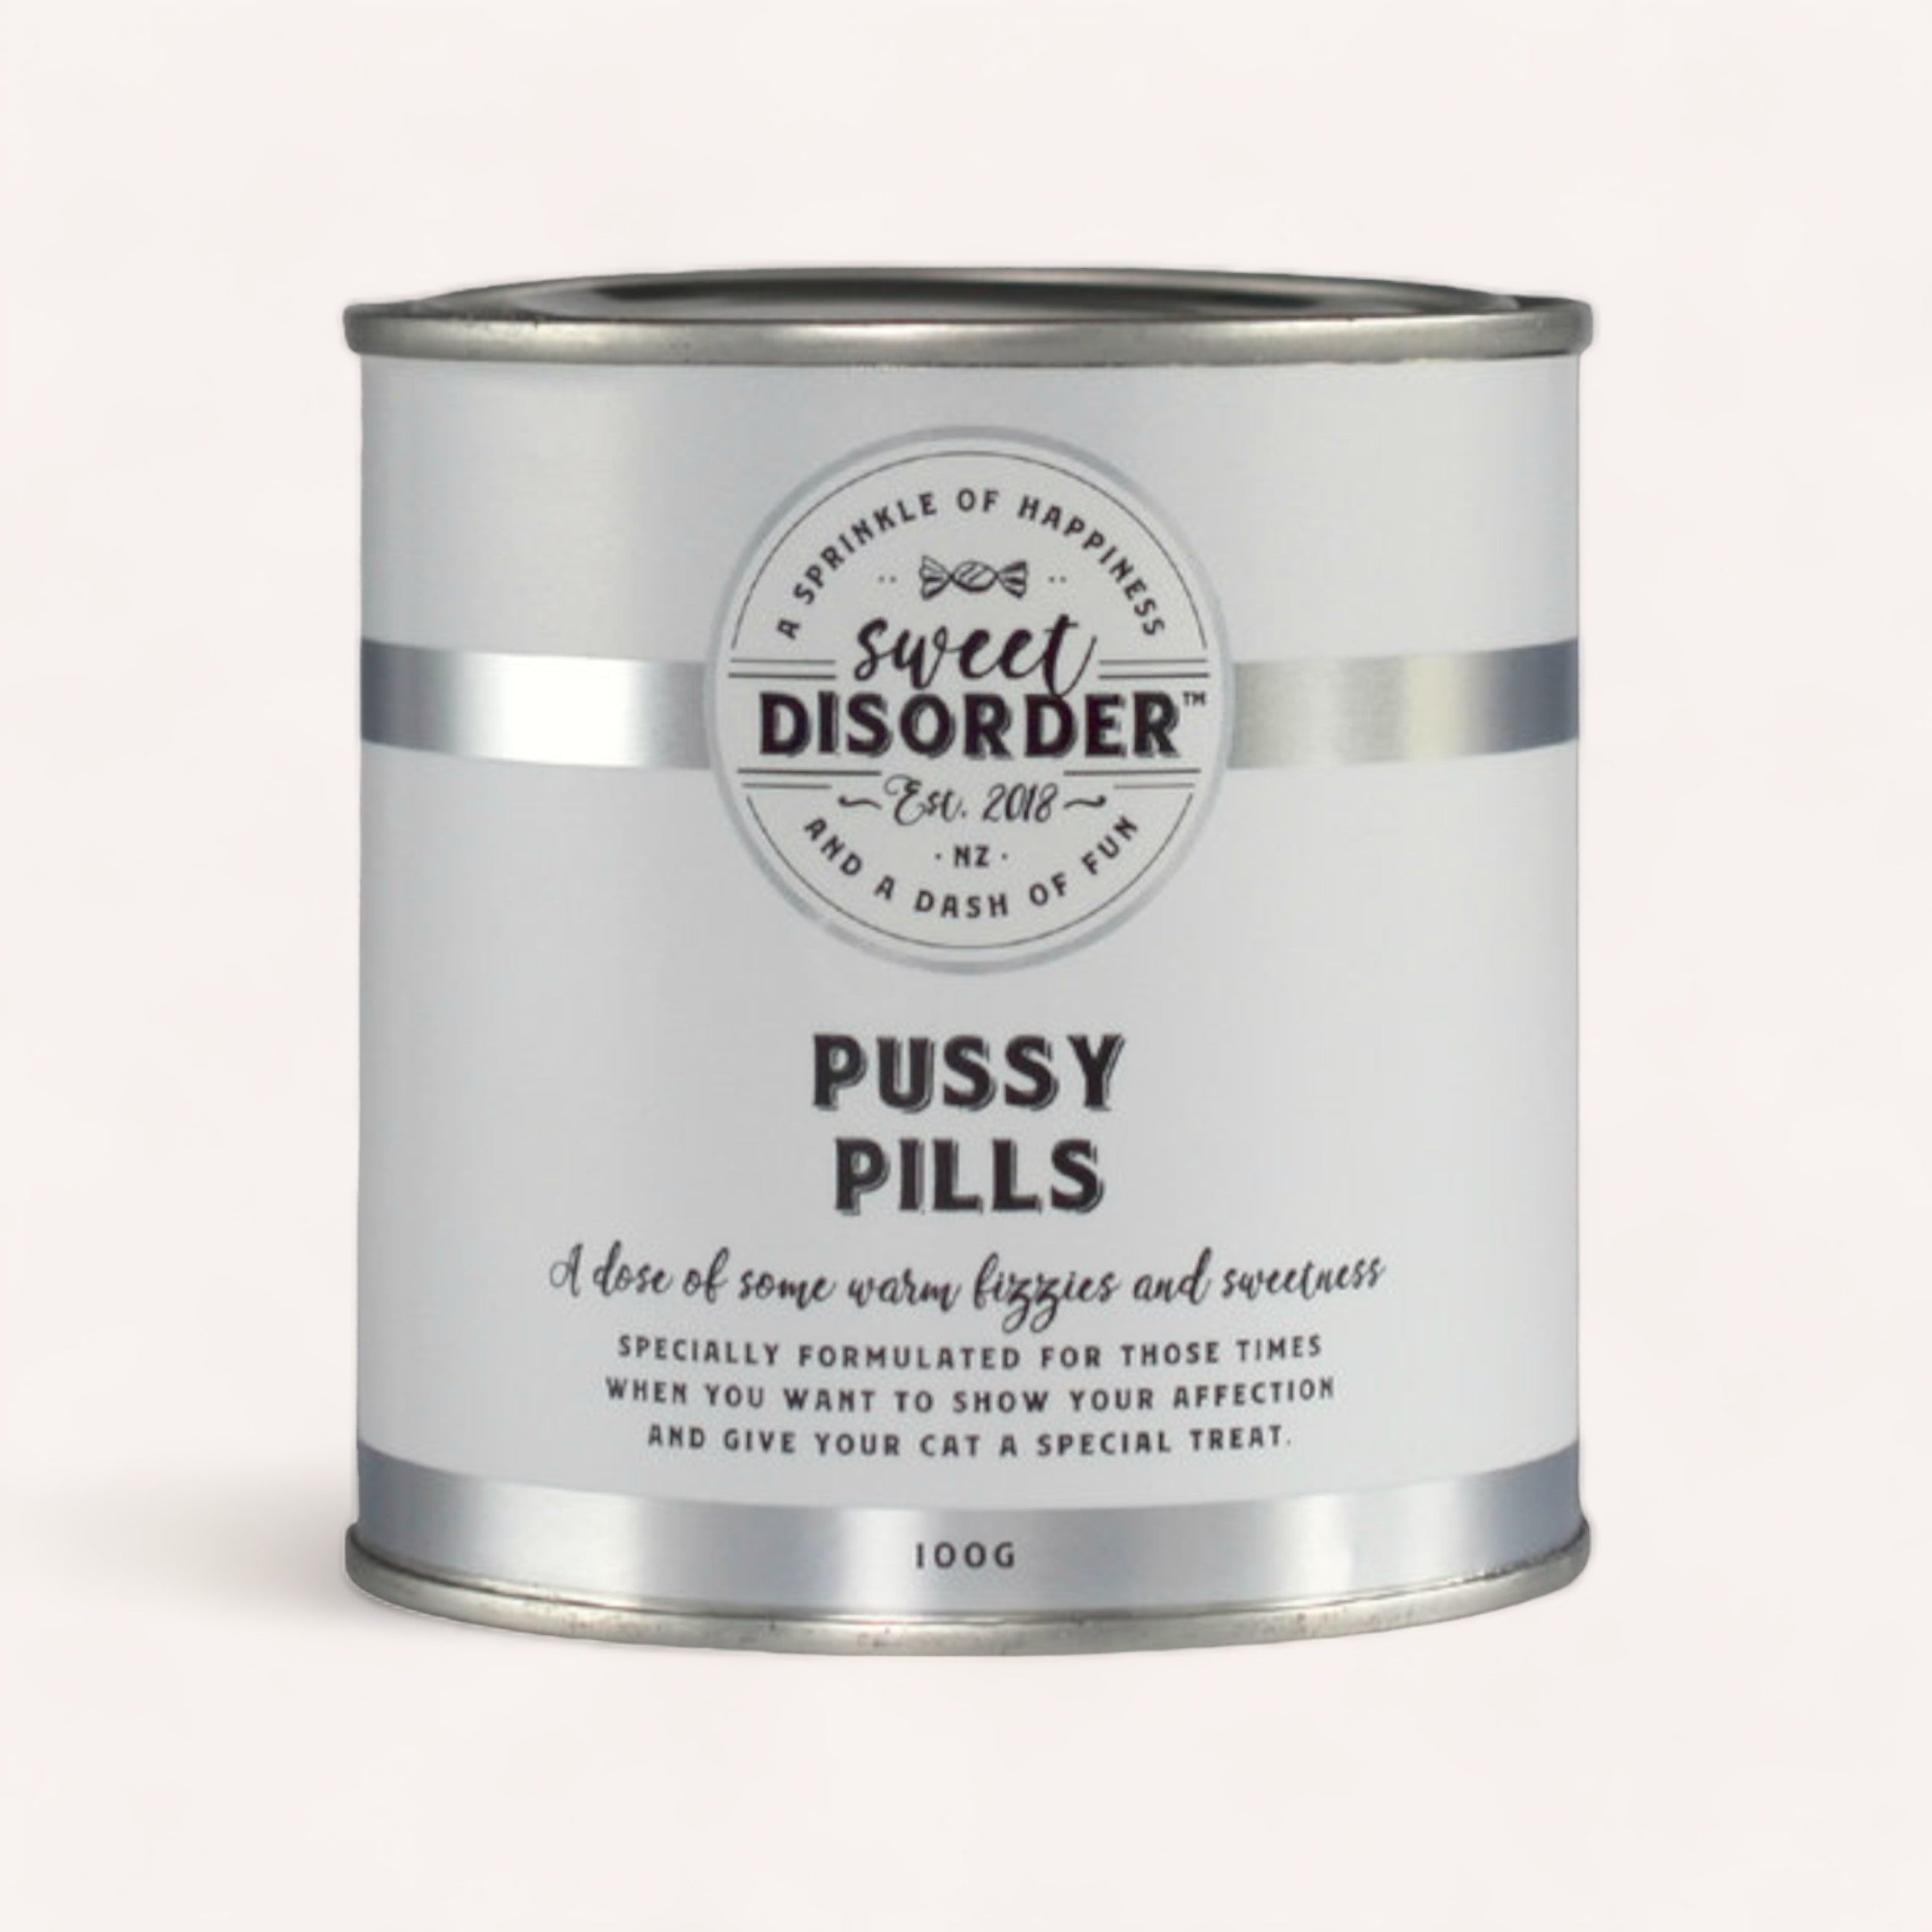 pussy pills cat treats by sweet disorder